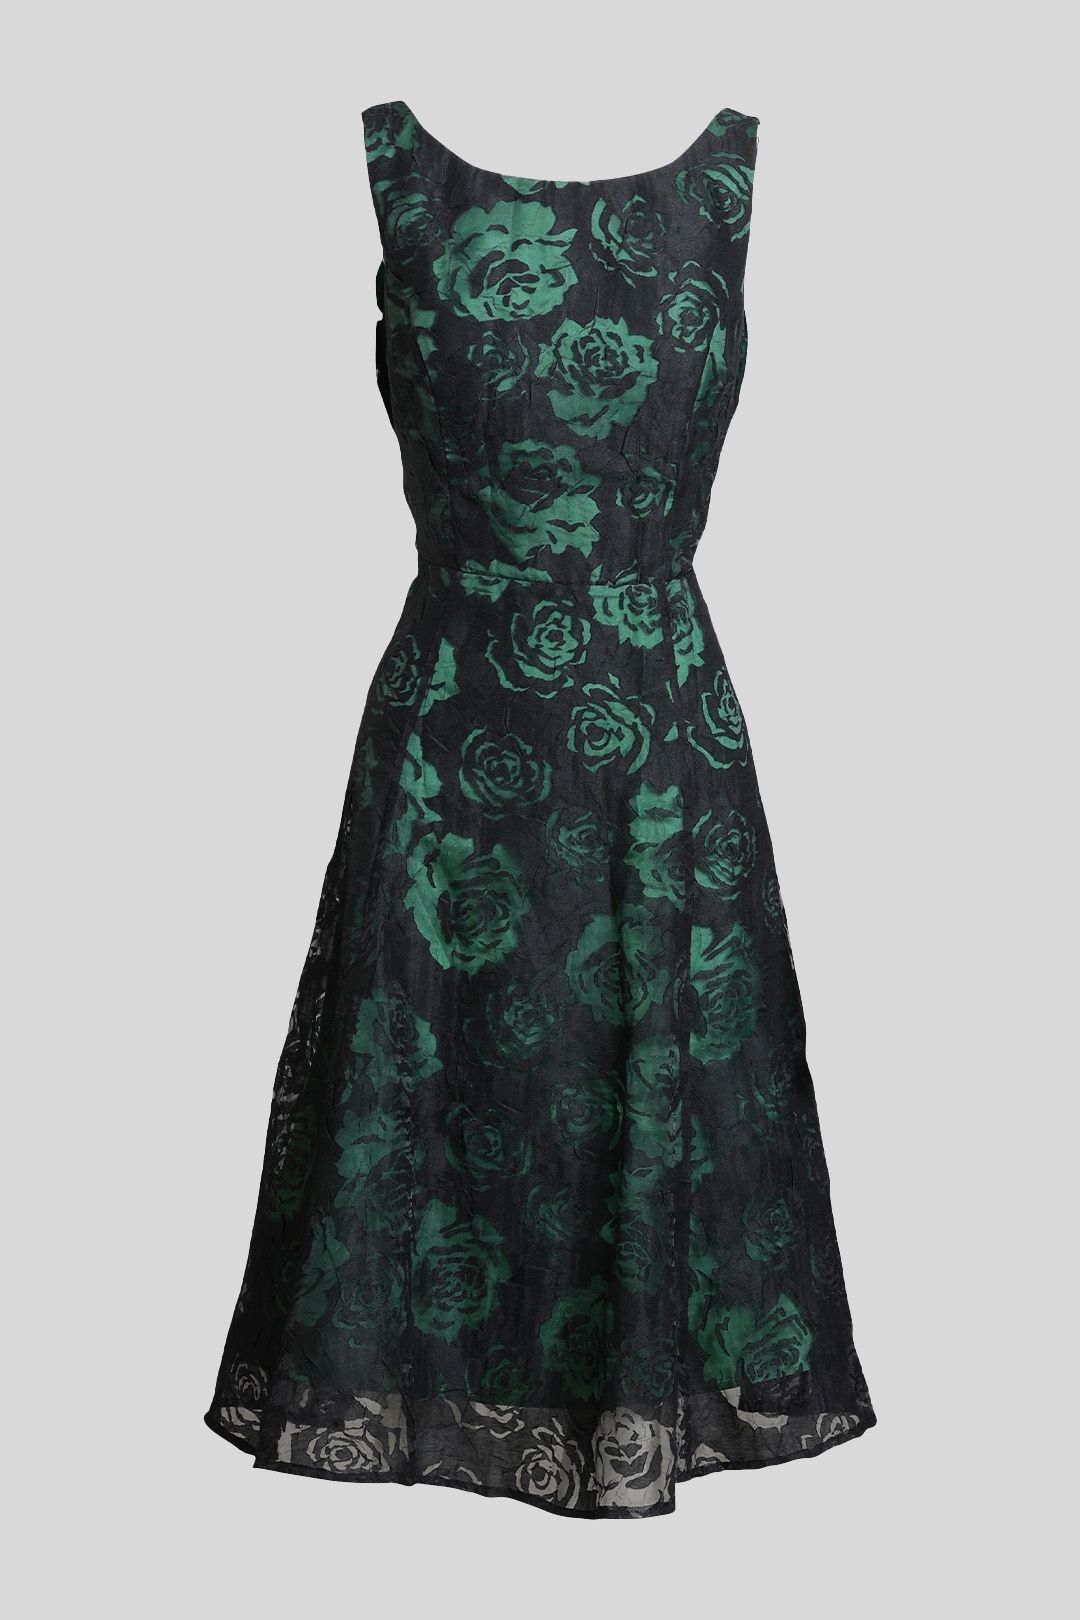 Phase Eight - Fit and Flare Black Green Floral Dress